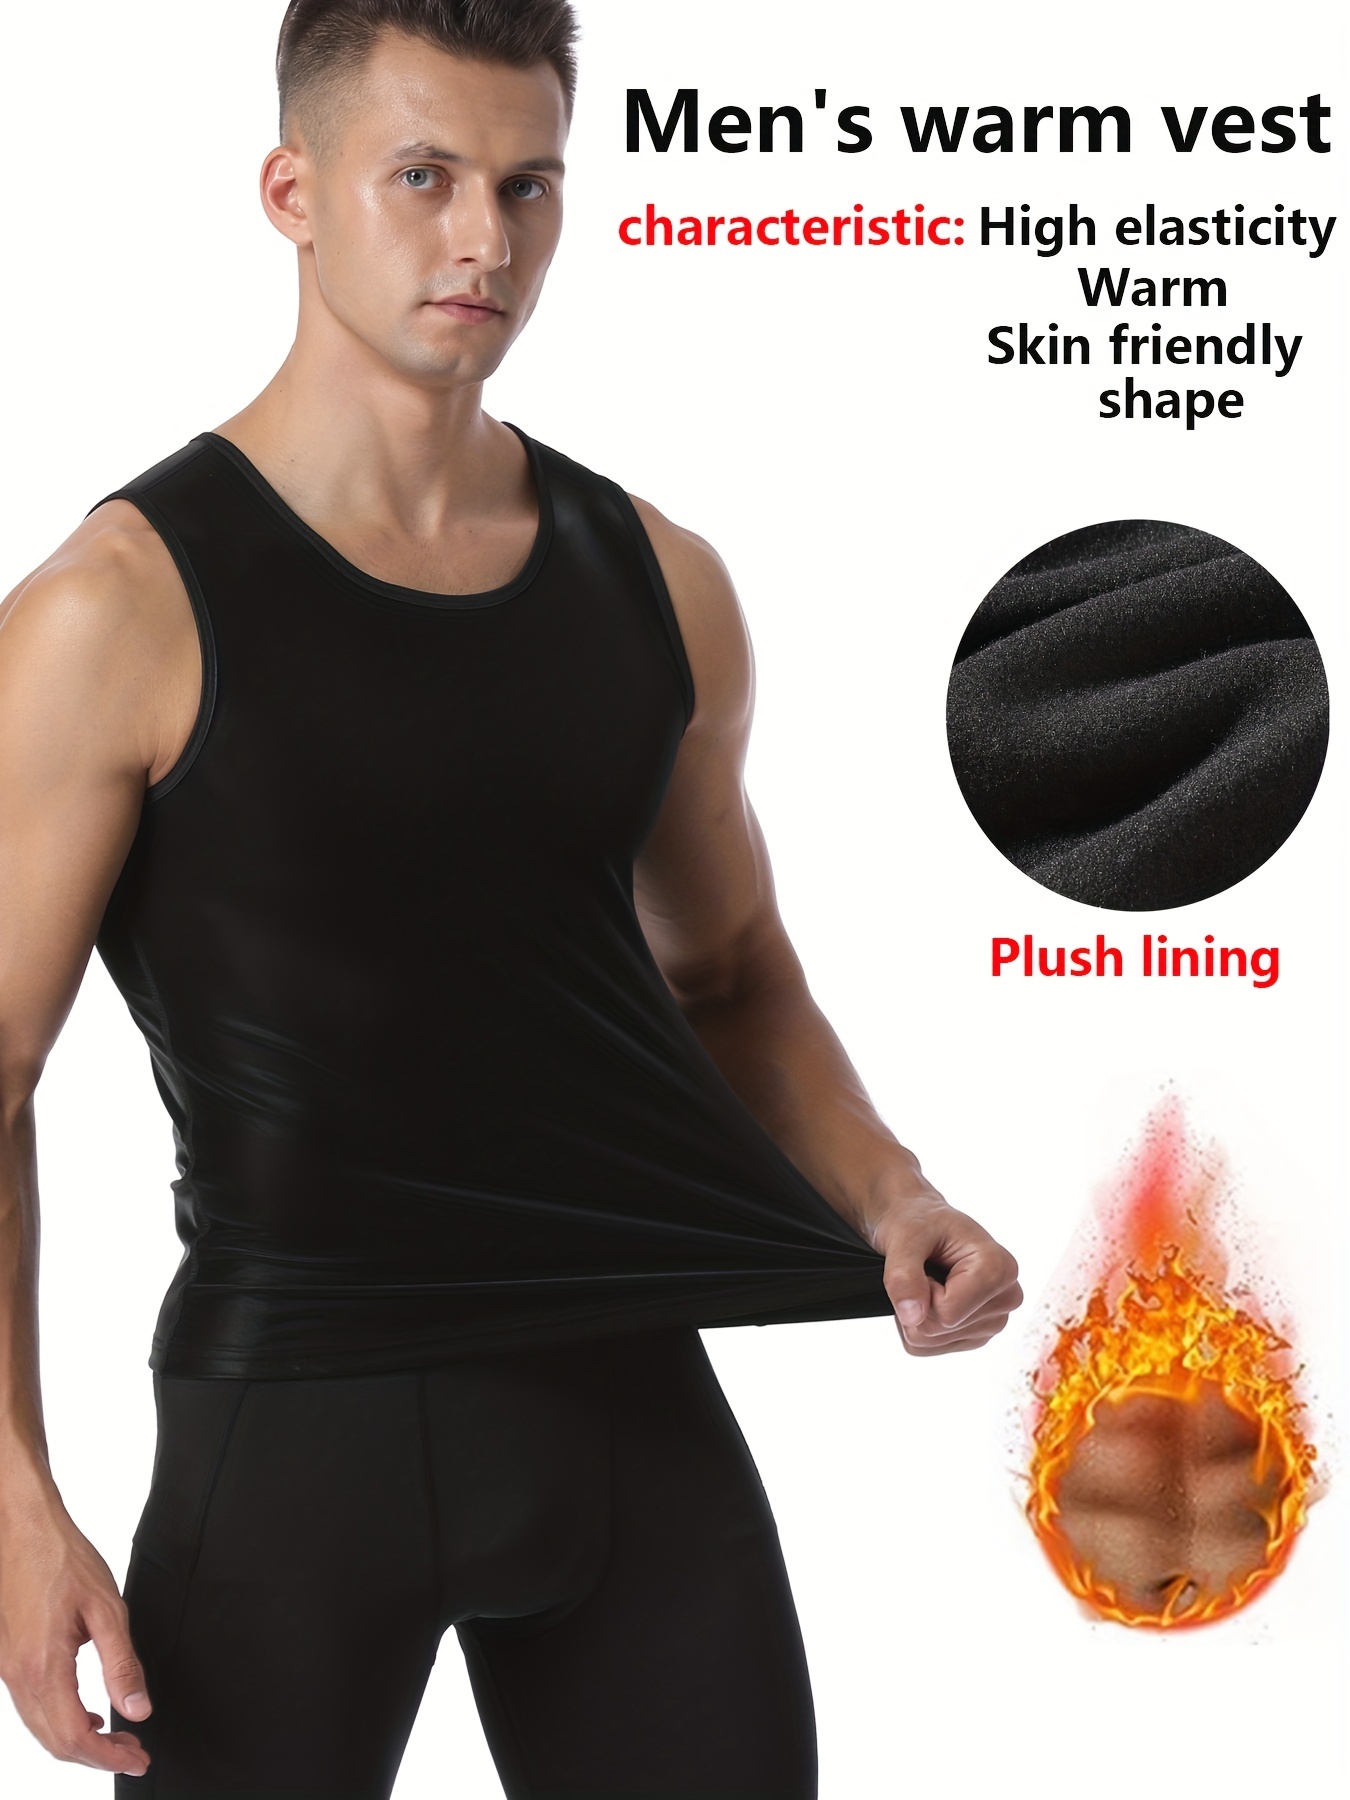 Men's Body Shaper Thermal Tank Tops, Breathable Comfy Sleeveless Round Neck  Tops, Men's Sports Vest For Gym Fitness